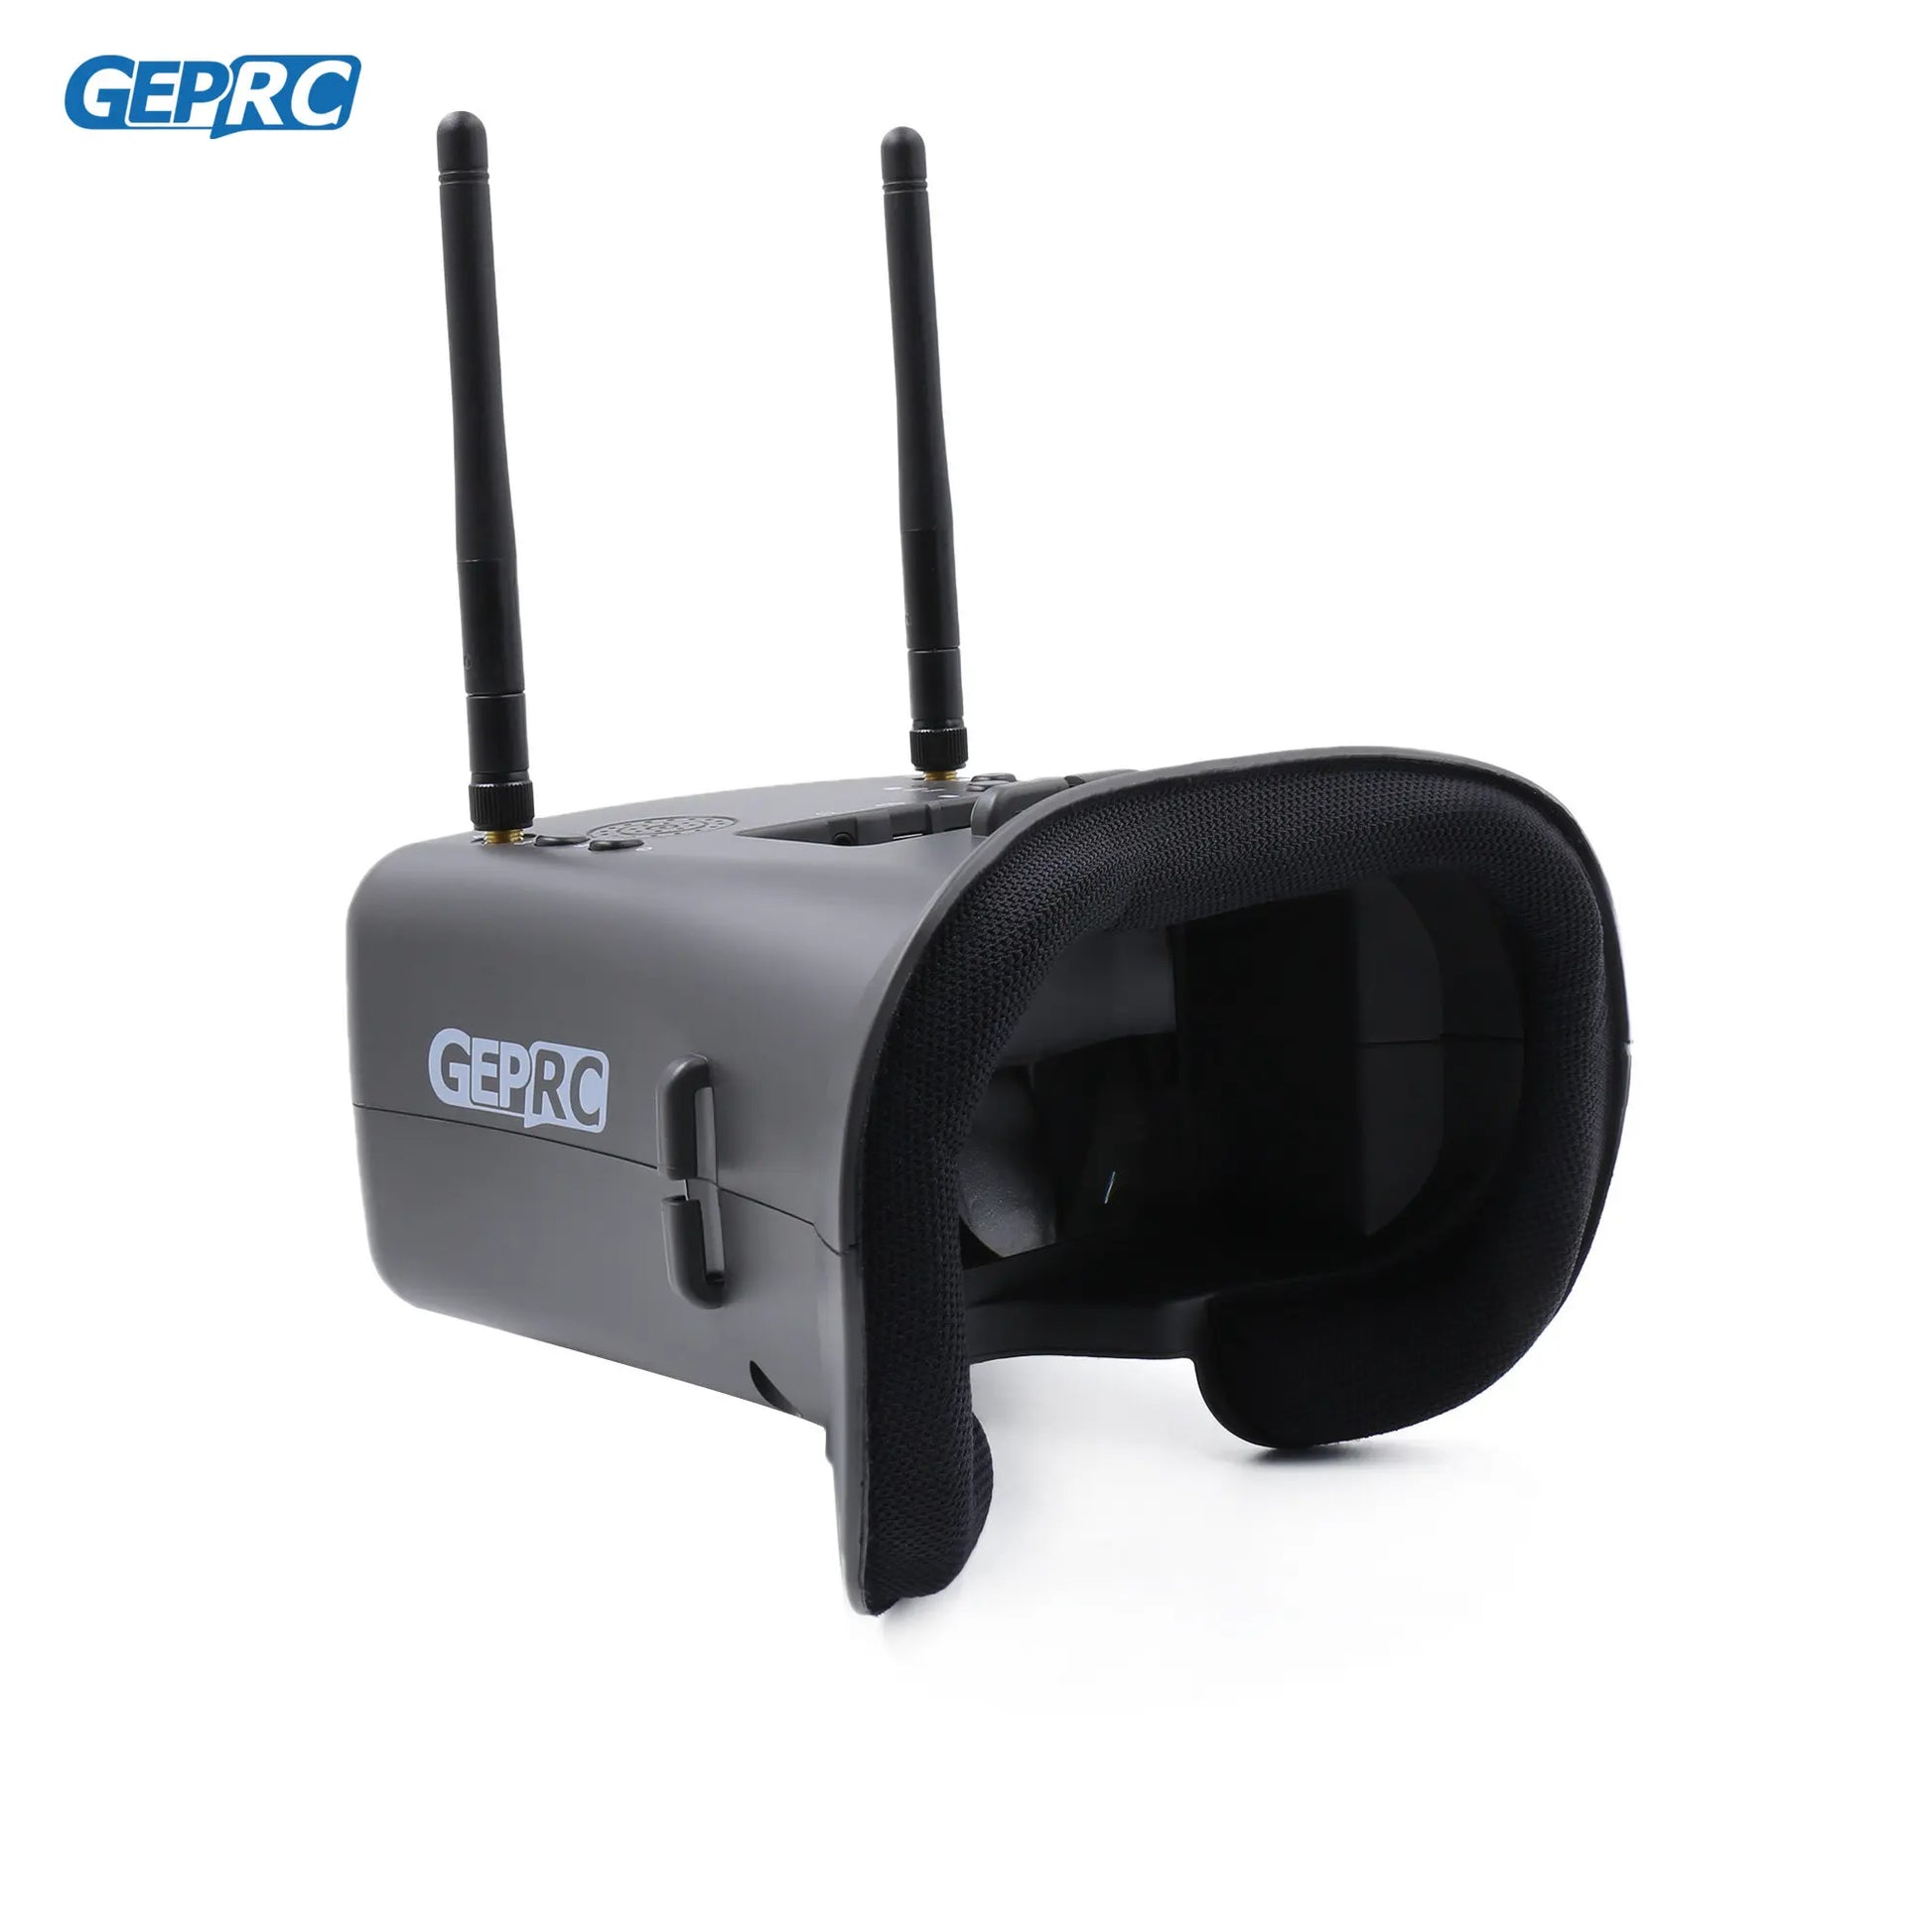 GEPRC FPV VRG1 Glasses - 4.3 Inch 800x480 Resolution 315g 32G Memory 2.5 Hours Working Time FPV Goggle